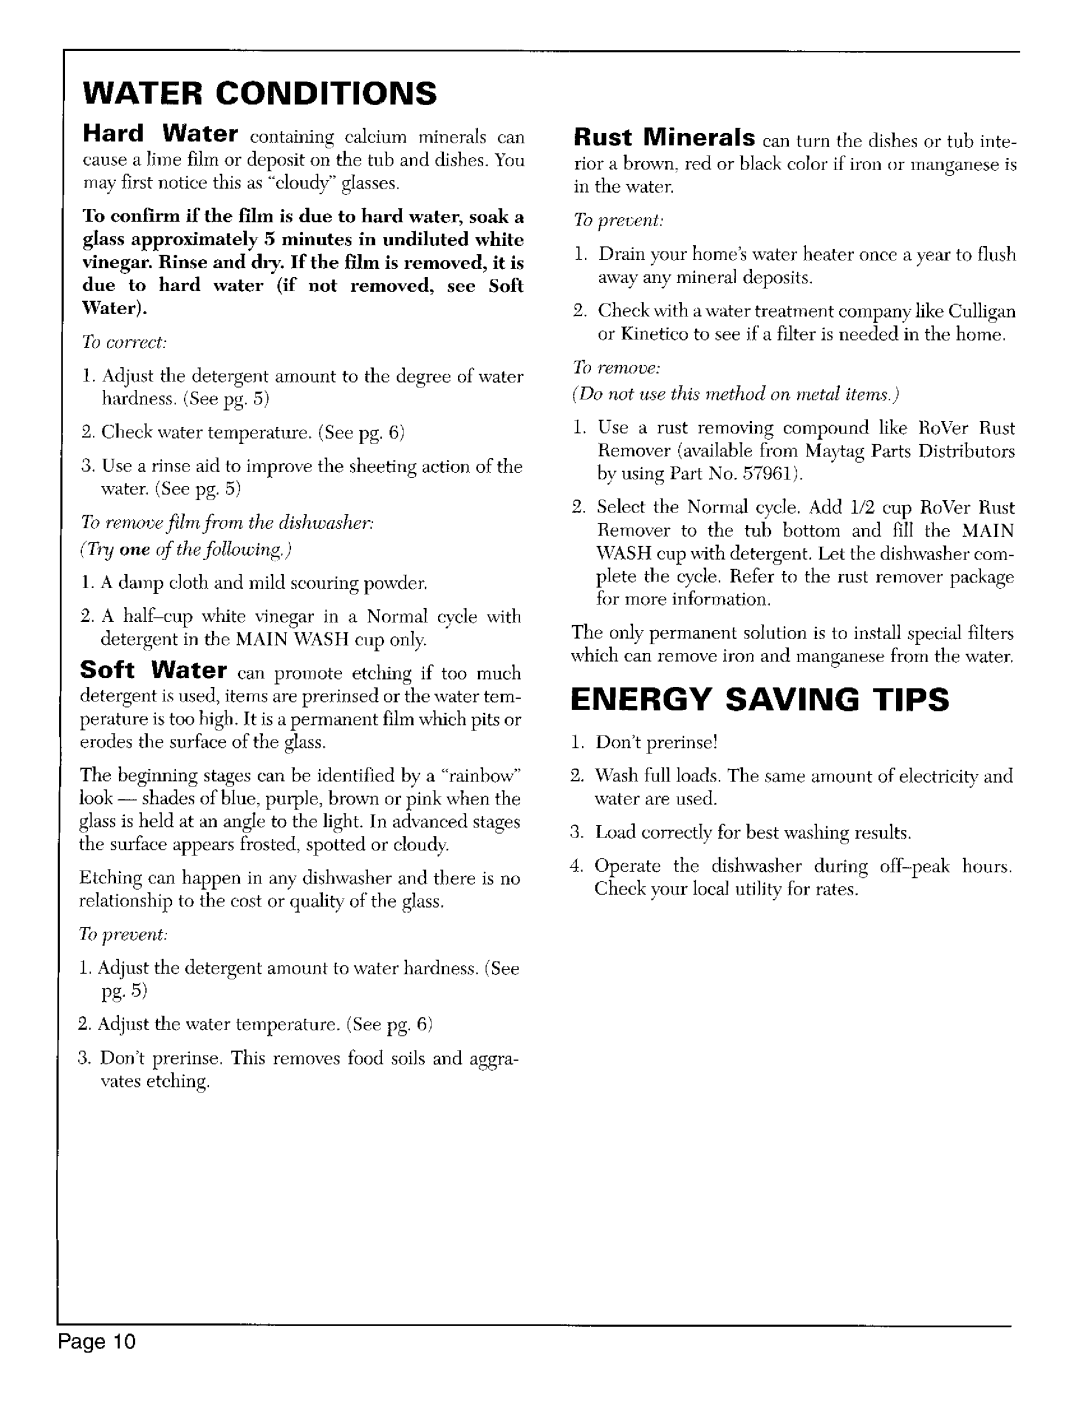 Maytag 6402 Water Conditions, Energy Saving Tips, To correct, To prevent, To remove Do not use this method on metal items 